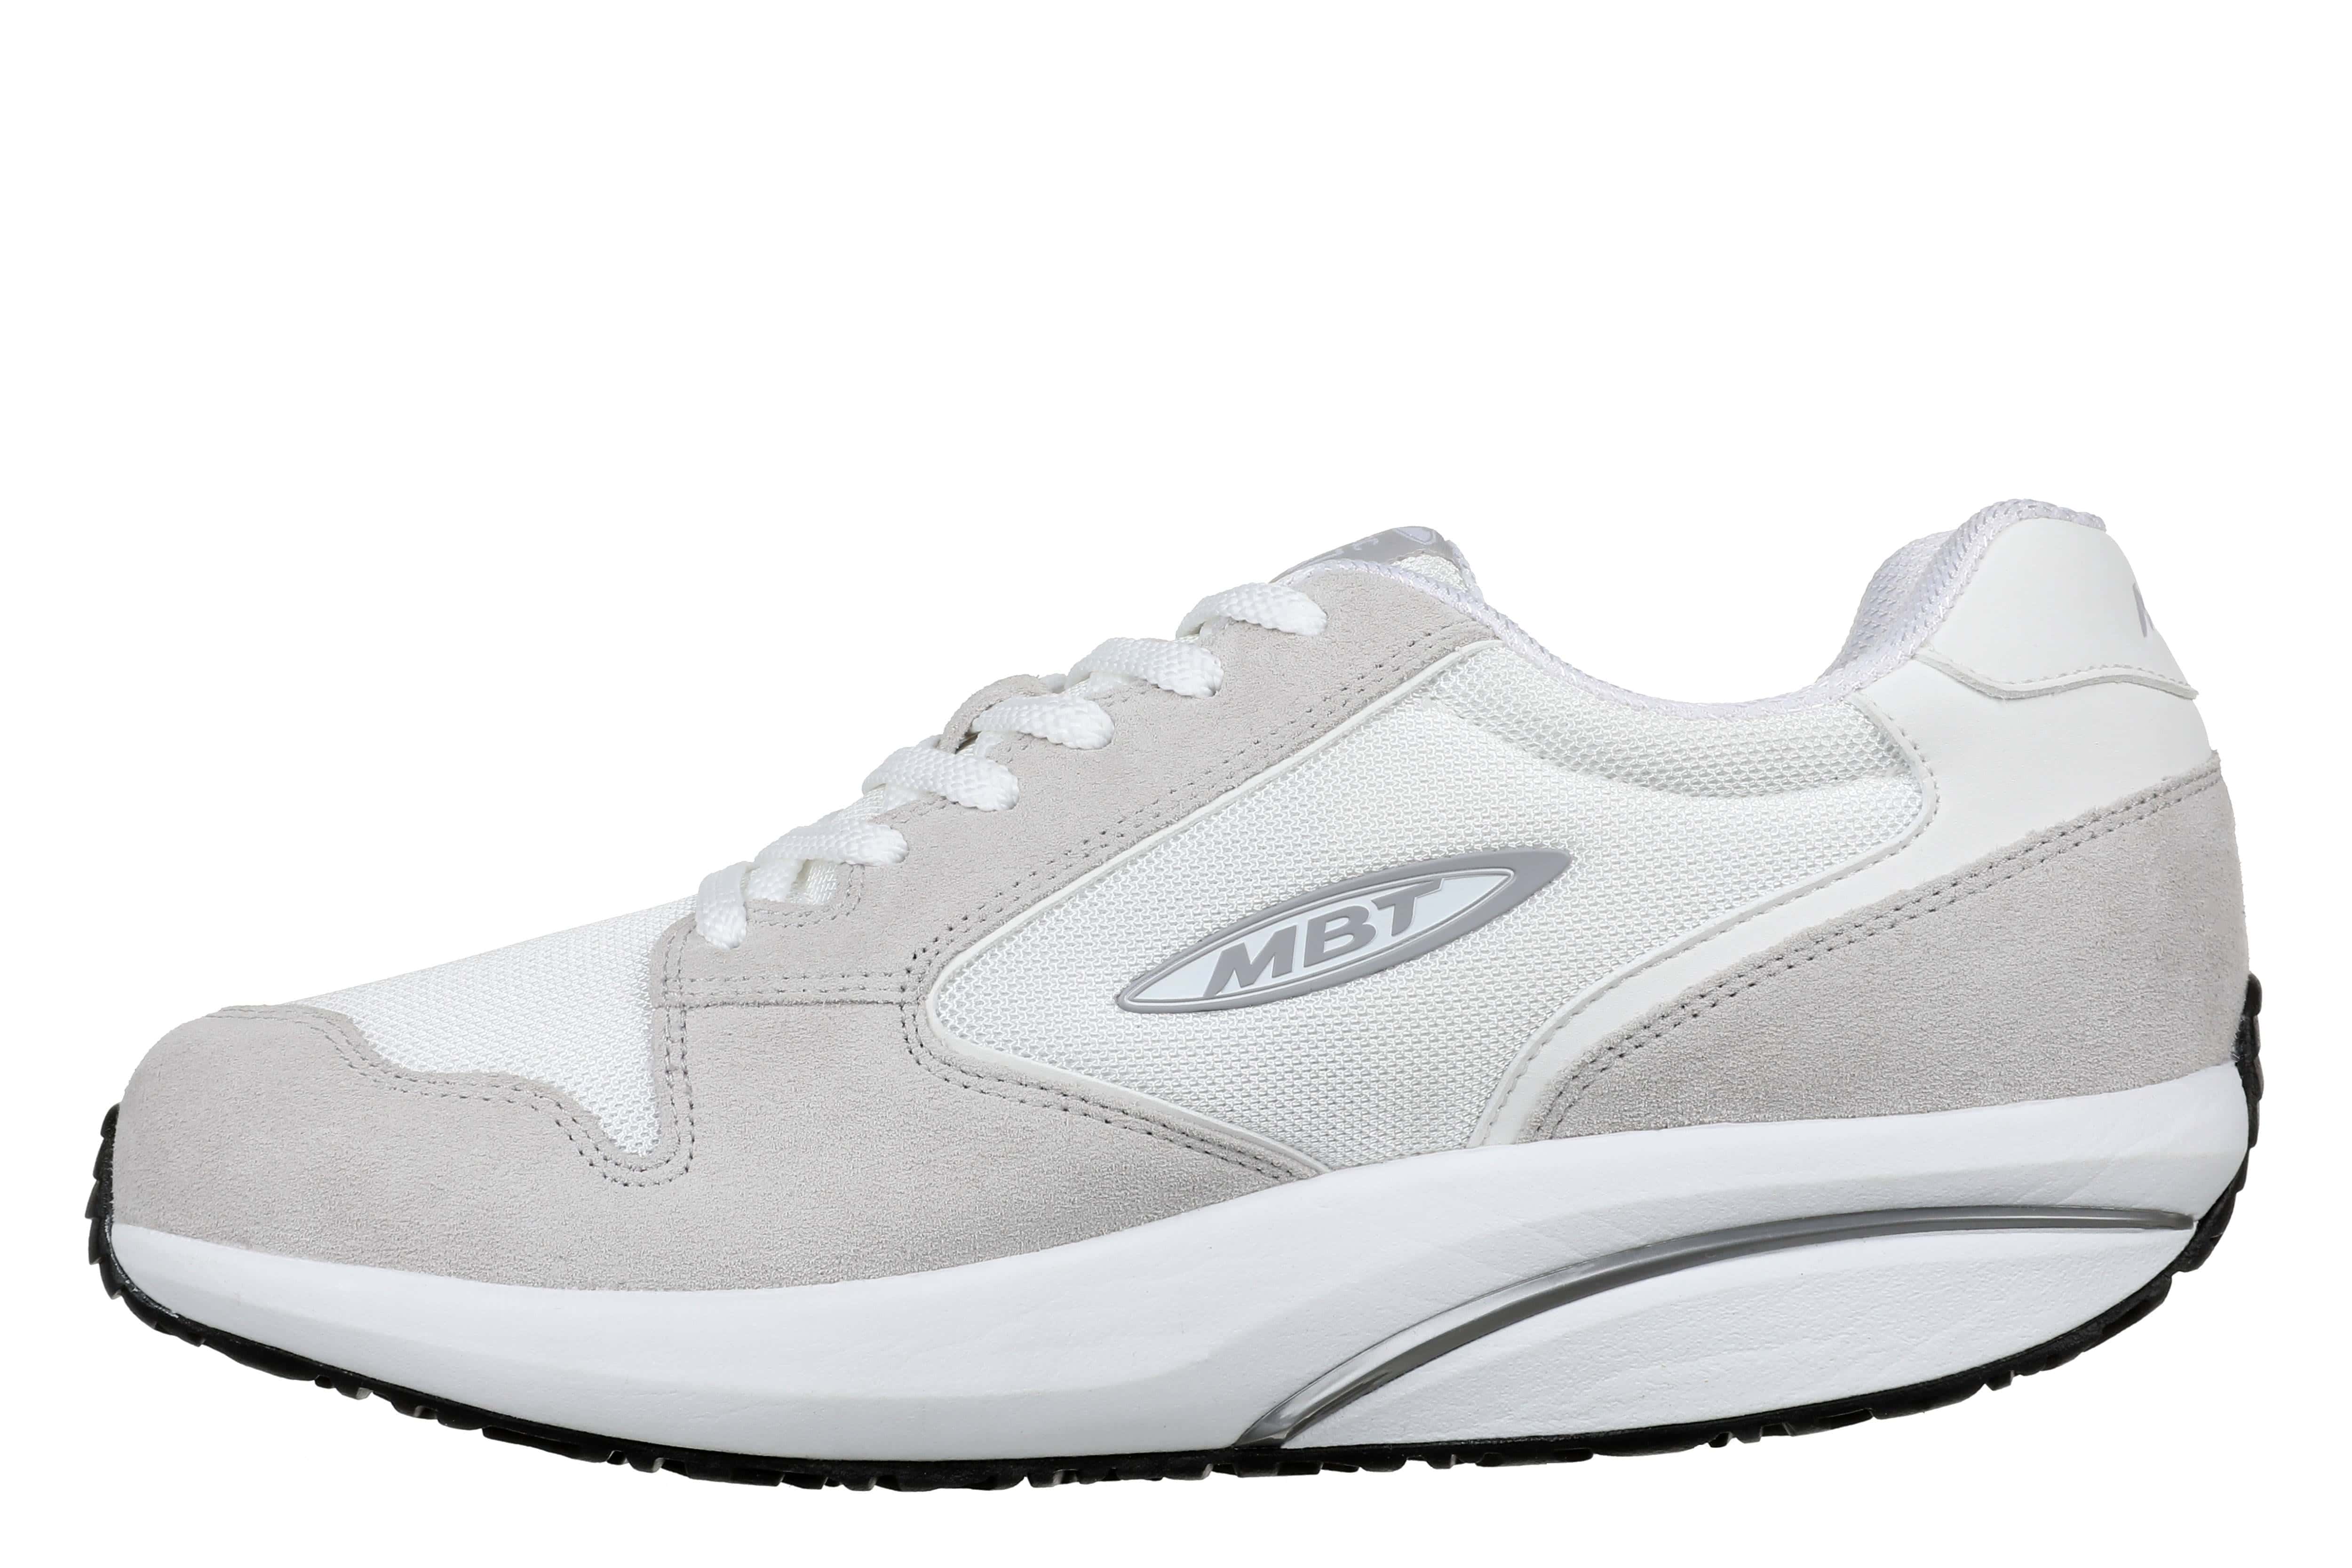 MBT SNEAKERS MAN MBT-1997 CLASSIC M WHITE